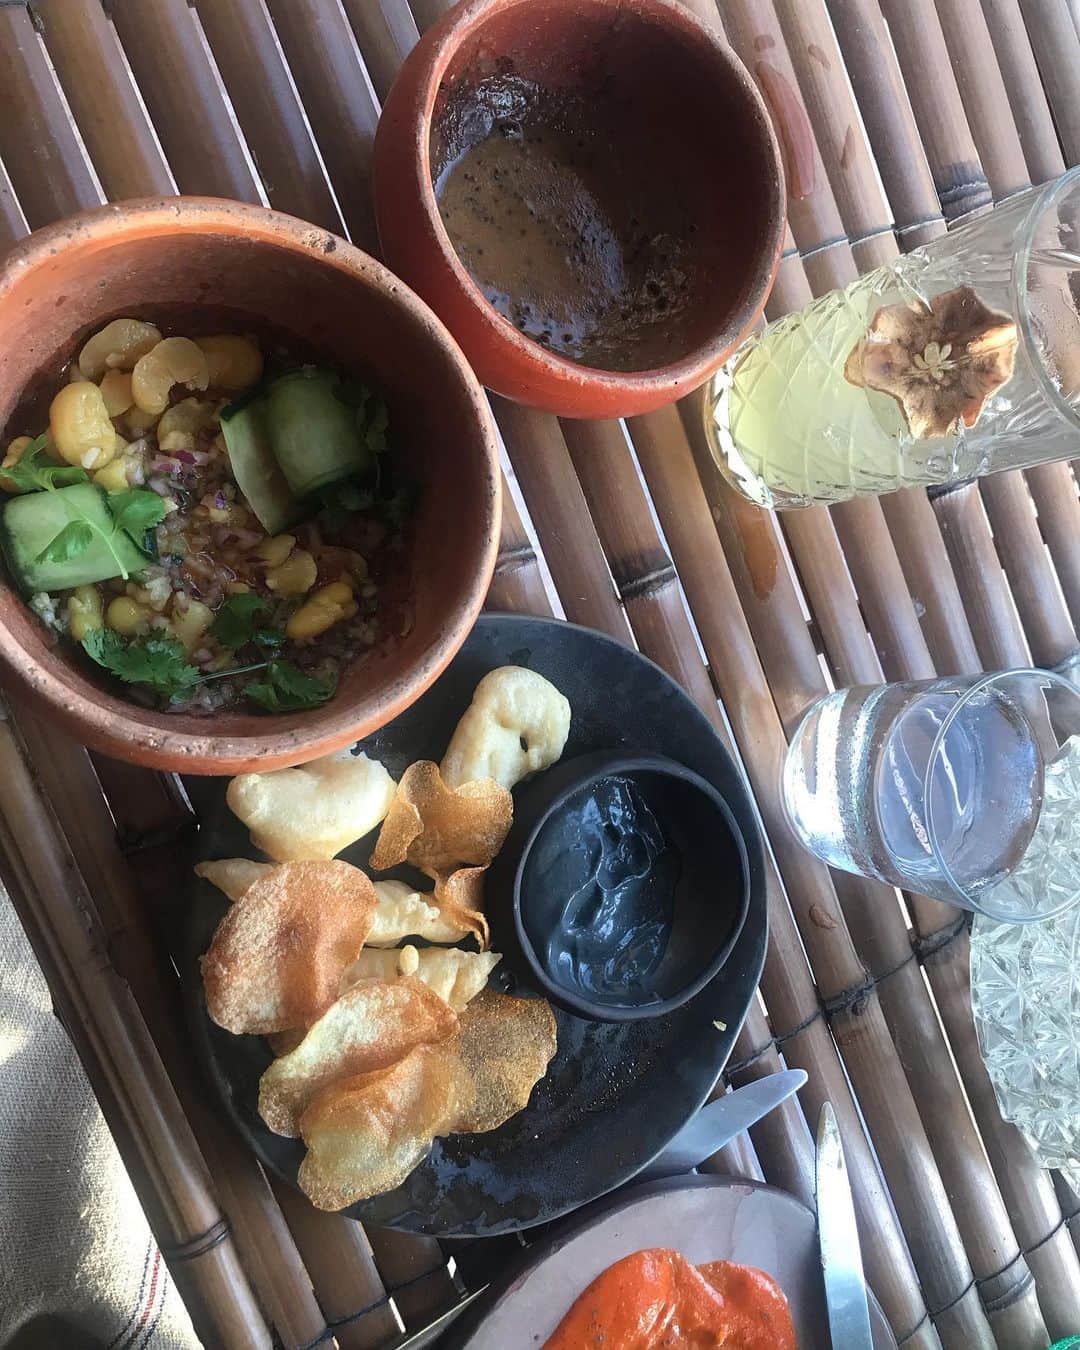 トームさんのインスタグラム写真 - (トームInstagram)「#Basico is anything but basic. The food is phenomenal, often veg or vegan, and served elegantly in a fancy expansive beach hut without any pretension. For your pleasure, the menu, across two nights, two tables, many drinks and several mosquitoes : 1/ Fried Plantain Tamal w Cotija Cheese, Green Tomato amd Quinoa stuffed Puff Corn Pastry; Oaxaca Cheese wrapped in Spinach, RedPepper Sauce and AVOCADO SALT; Lentils Terrine in Chaya leaf w Miso Demi glace and tanner mustard seed  2/ Broad Bean Ceviche w Cucumber, Green Tomato, Cilantro mixed and bathed w Lemon, Avocado Oil and Habnero Chilli Sauce; Basico #fishandchips w classic corn tempura fish, potato chips and BLACK MAYONNAISE  3/ Cabbage BBQ wrapped by Plantain Leaf and BBQSauce, white bean purée smoked tomato and leek  4/ Duck Salpicon w Duck Confit, Radish, Cucumber, Cabbage and Sour Orange on Corn Tortilla  5/ VEGAN MOLE w Mushroom and Huauzontle, tanned onion w Oregano and the freshest tortillas in the known universe  6/  Tuna Toast cubes w Soy and Ginger dressing and home made Avocado and ASH Mayonnaise  7/ Grilled Octopus ‘cooked’ at low temperature with Atichucha Sauce, Broad Been Puree, Grelot Onions and Sweet Potato 8/ CHOCOLATE Crumble w a semi long chocolate, creamy chocolate, cocoa nibs and dulche de Lecter ice cream  9/ Table 1wuth a view to the sand streets of Holbox  10/ Table 2, with Besser Brick wall @caitlinstutely」8月6日 9時00分 - tomenyc